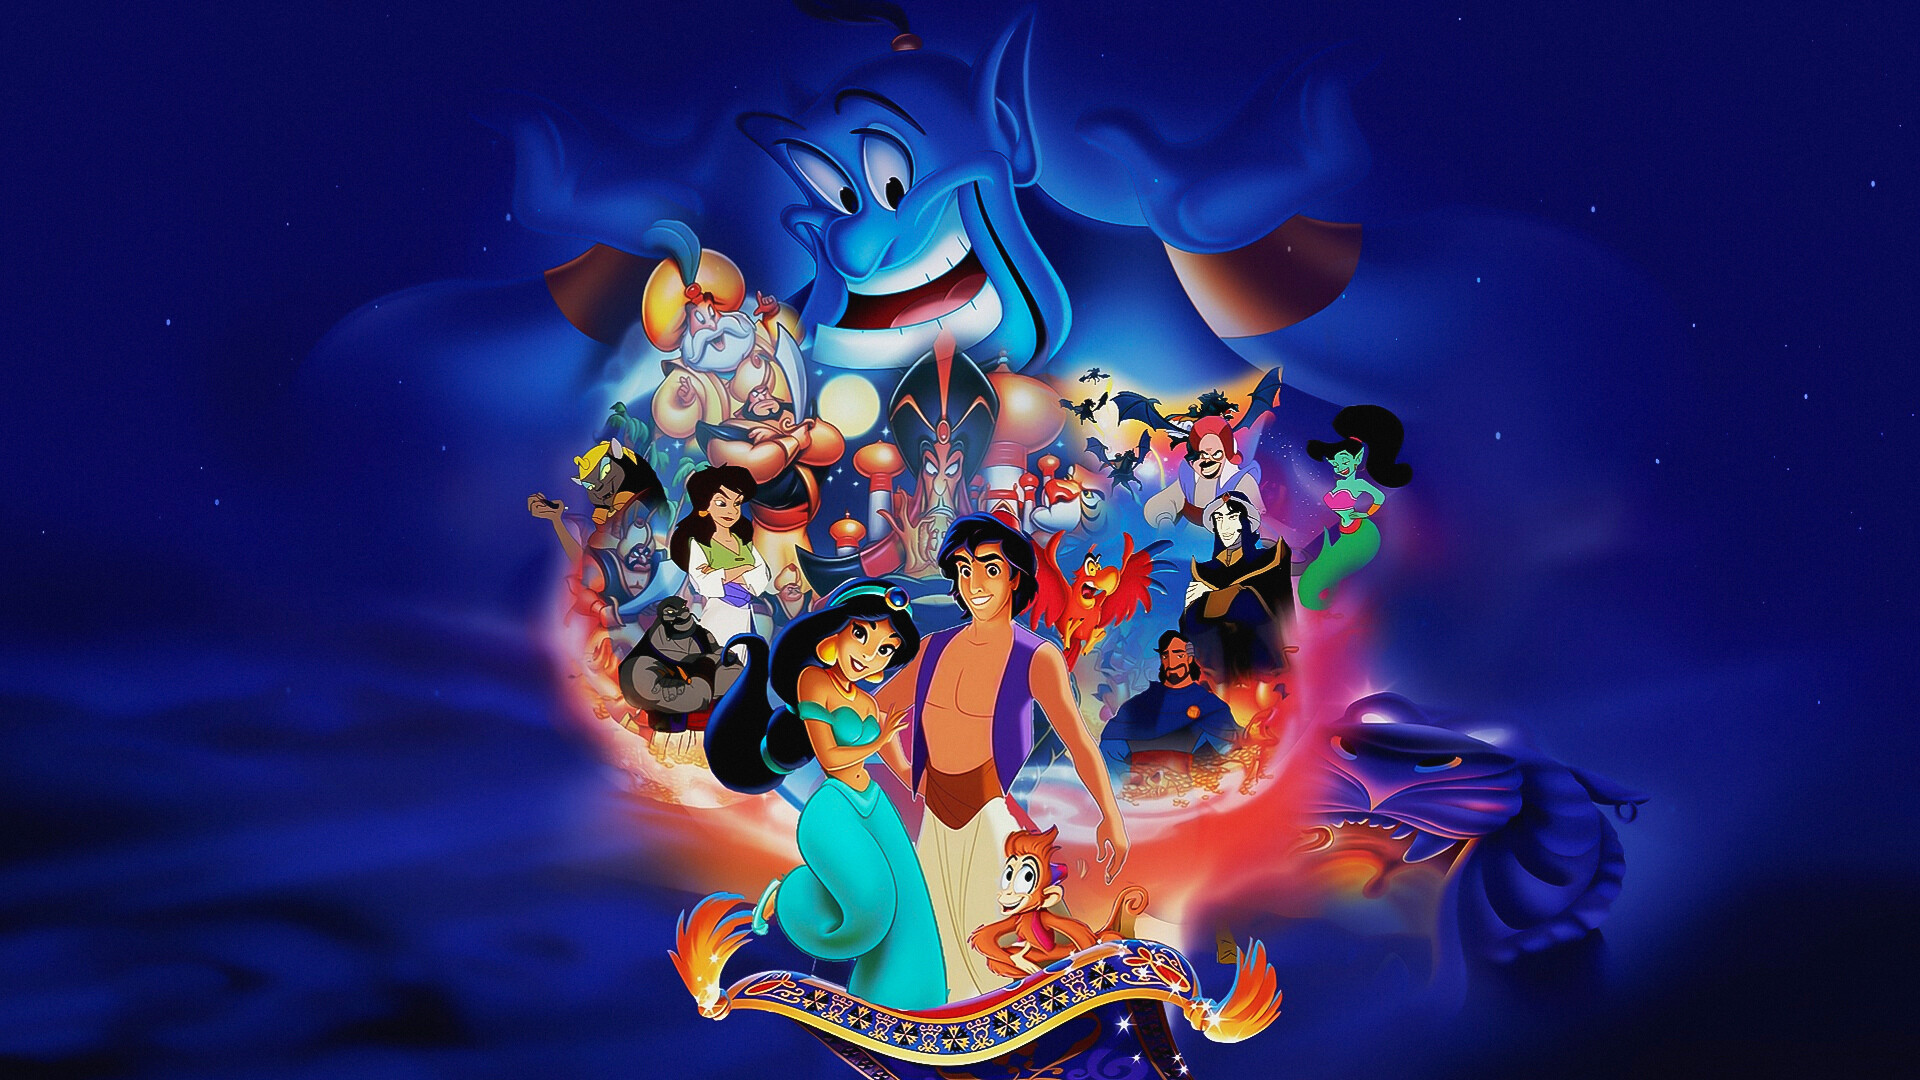 Aladdin (Cartoon): This is the first Disney animated film to feature a non-Caucasian heroine. 1920x1080 Full HD Wallpaper.